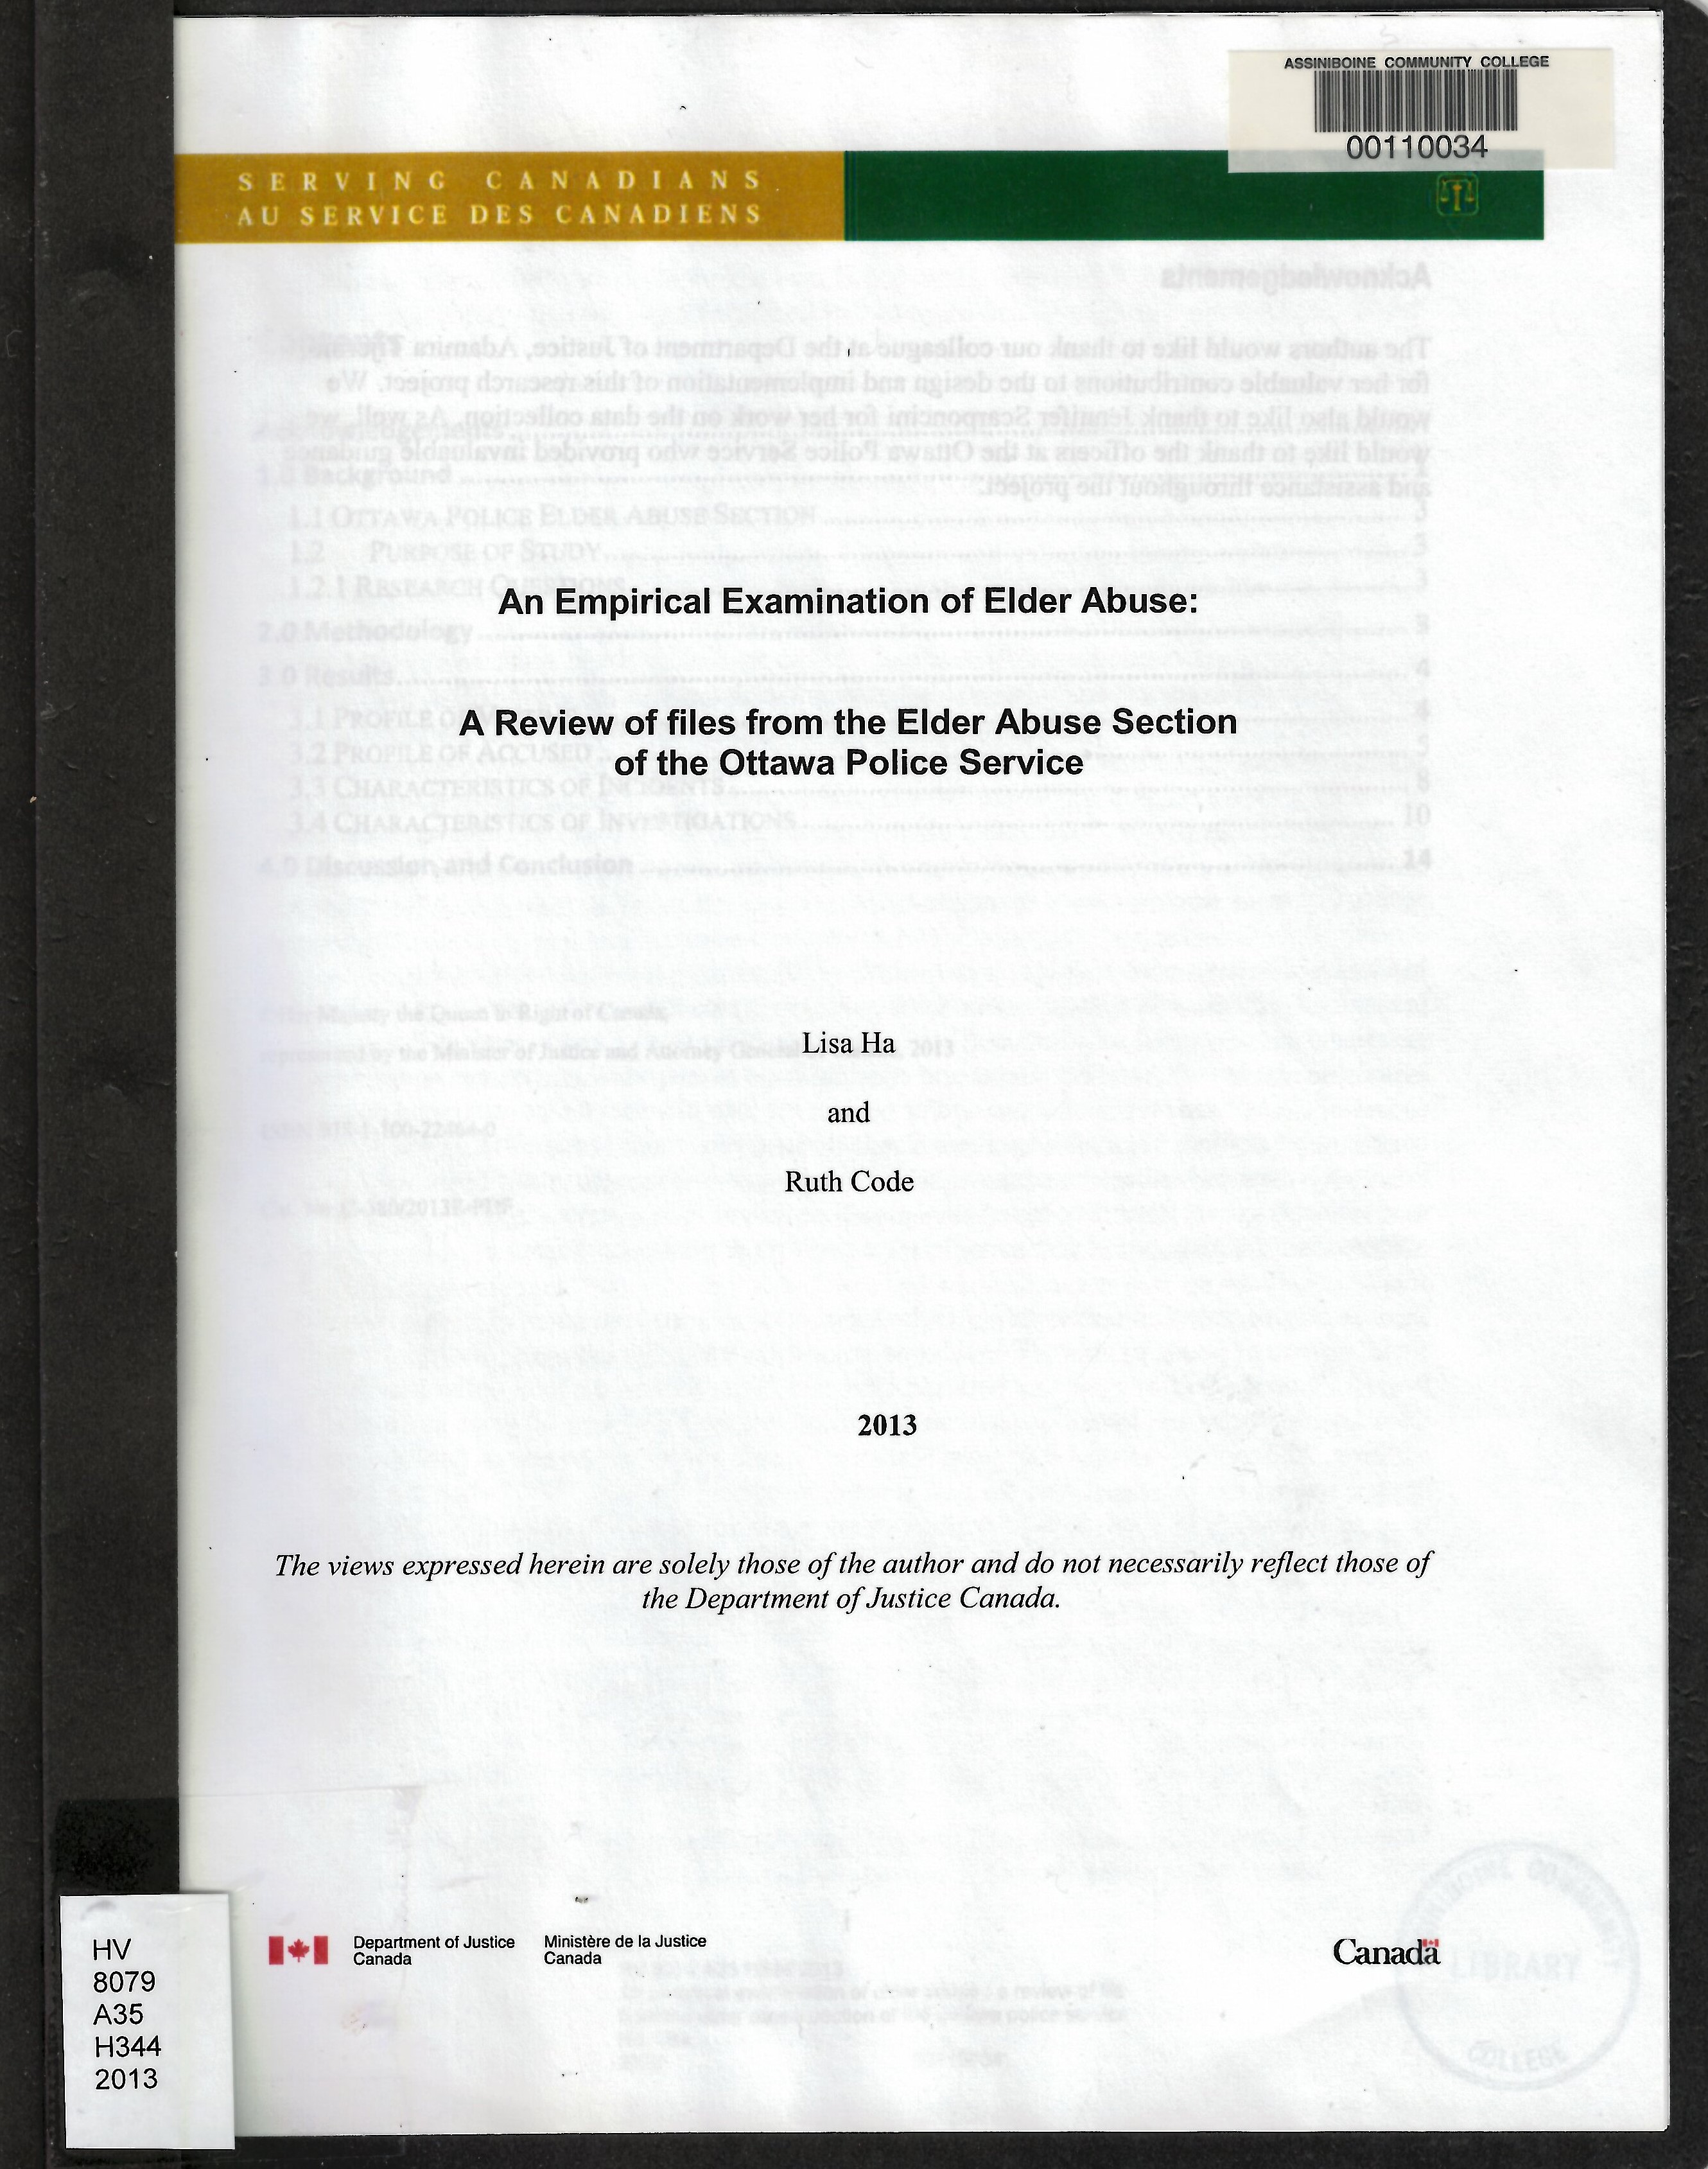 An empirical examination of elder abuse : a review of files from the elder abuse section of the Ottawa police service